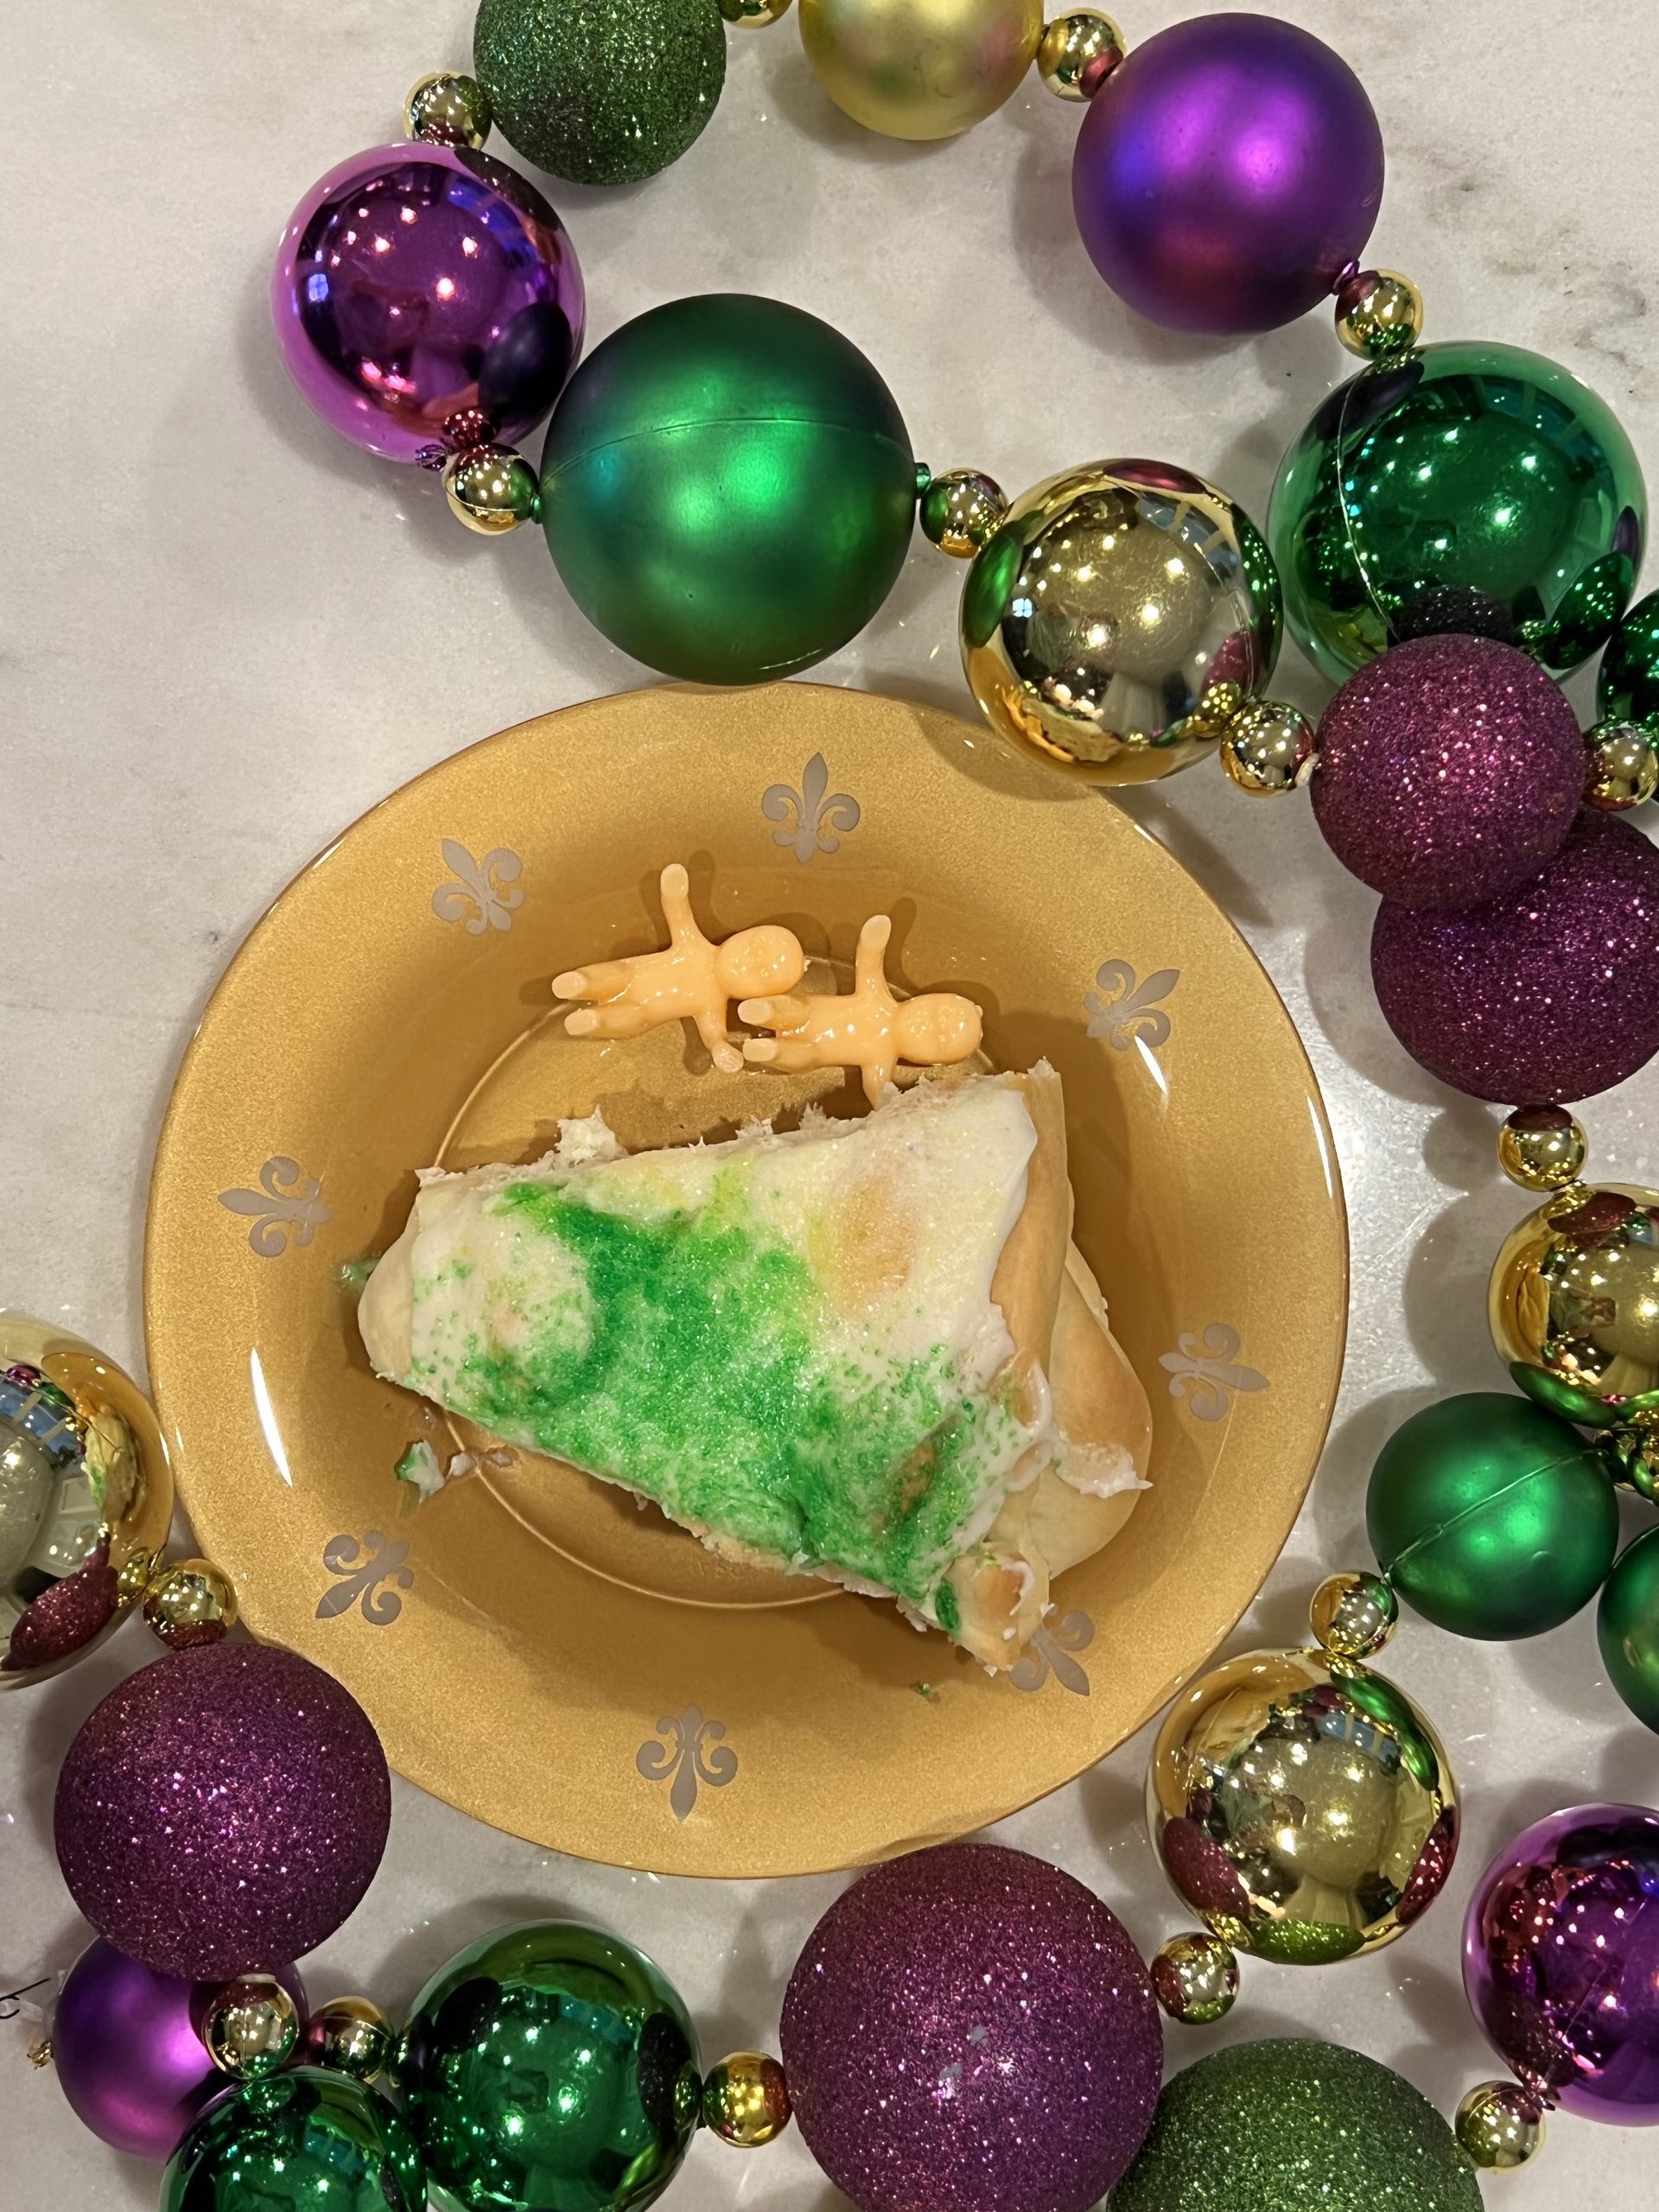 Slice of King Cake with plastic babies on the plate, surrounded by Mardi Gras beads